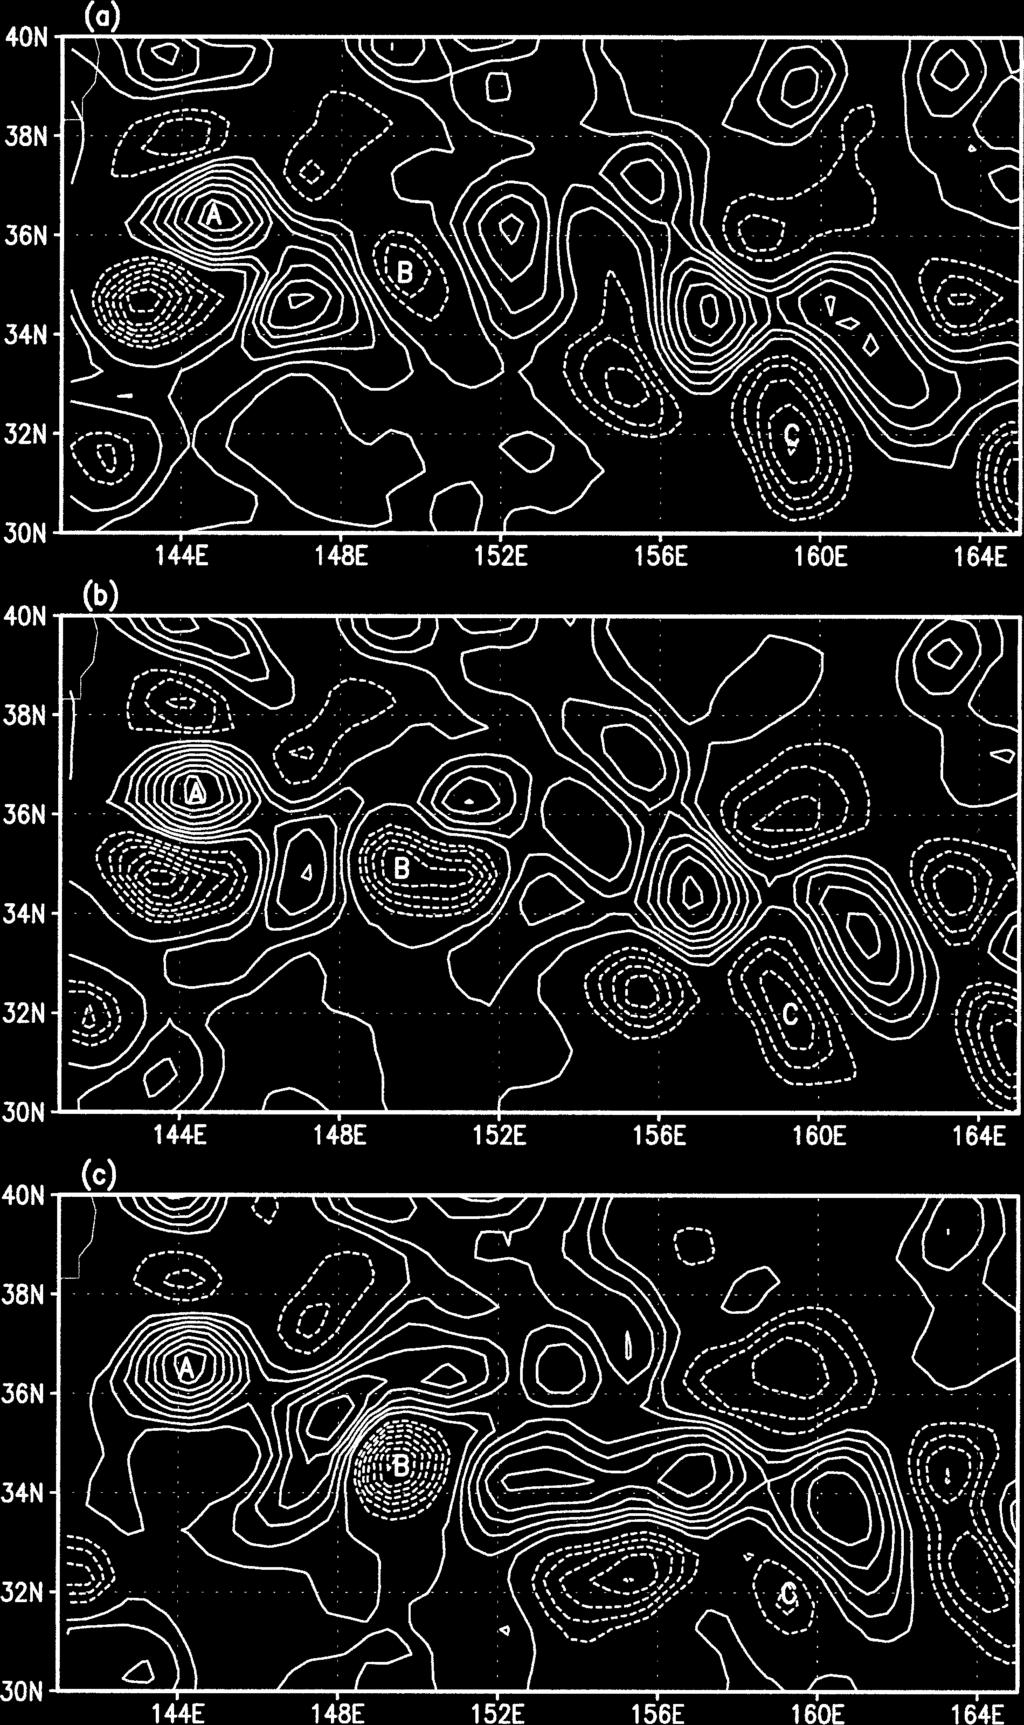 MARCH 2002 LUO AND JAMESON 389 FIG. 8. Sea surface height contours showing eddies in three snapshots of T/P data at 10-day intervals.